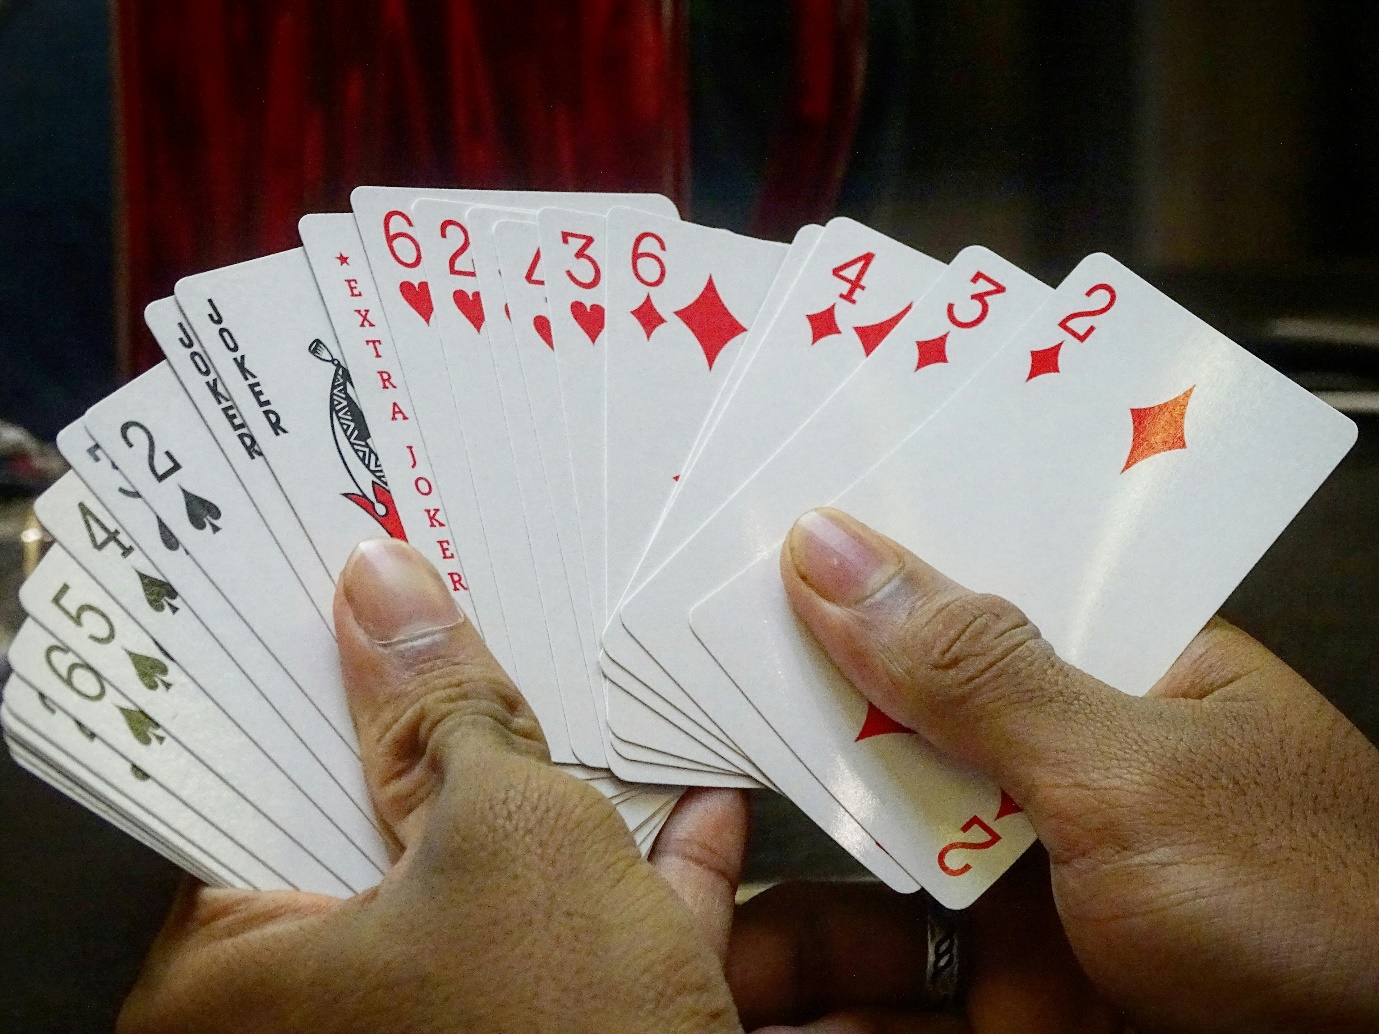 A hand holding a deck of cards

Description automatically generated